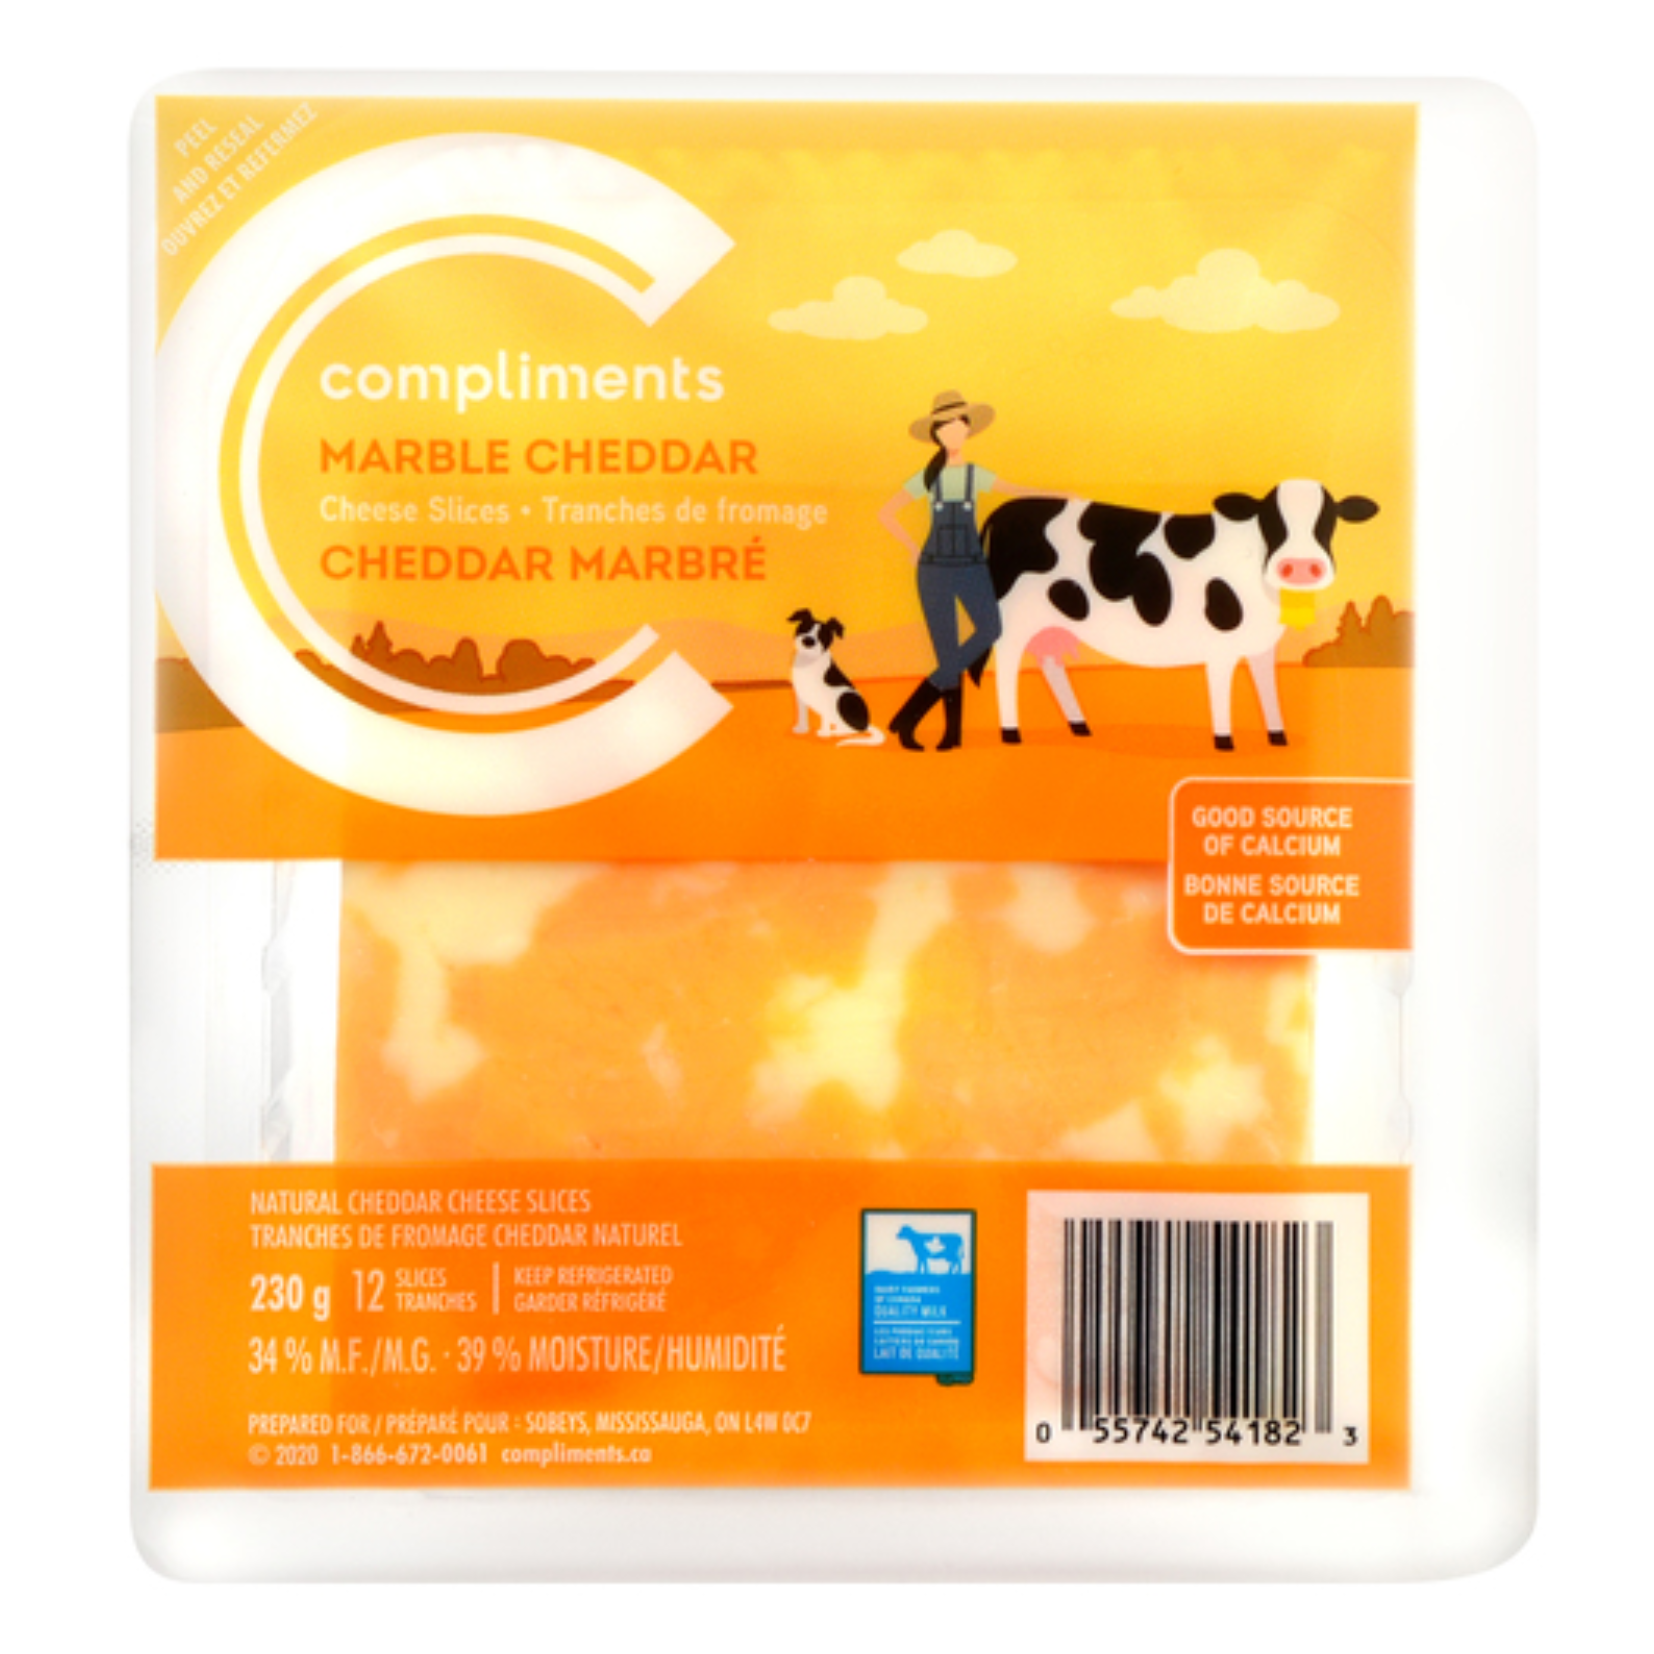 Compliments Marble Cheddar Cheese Slices 230g